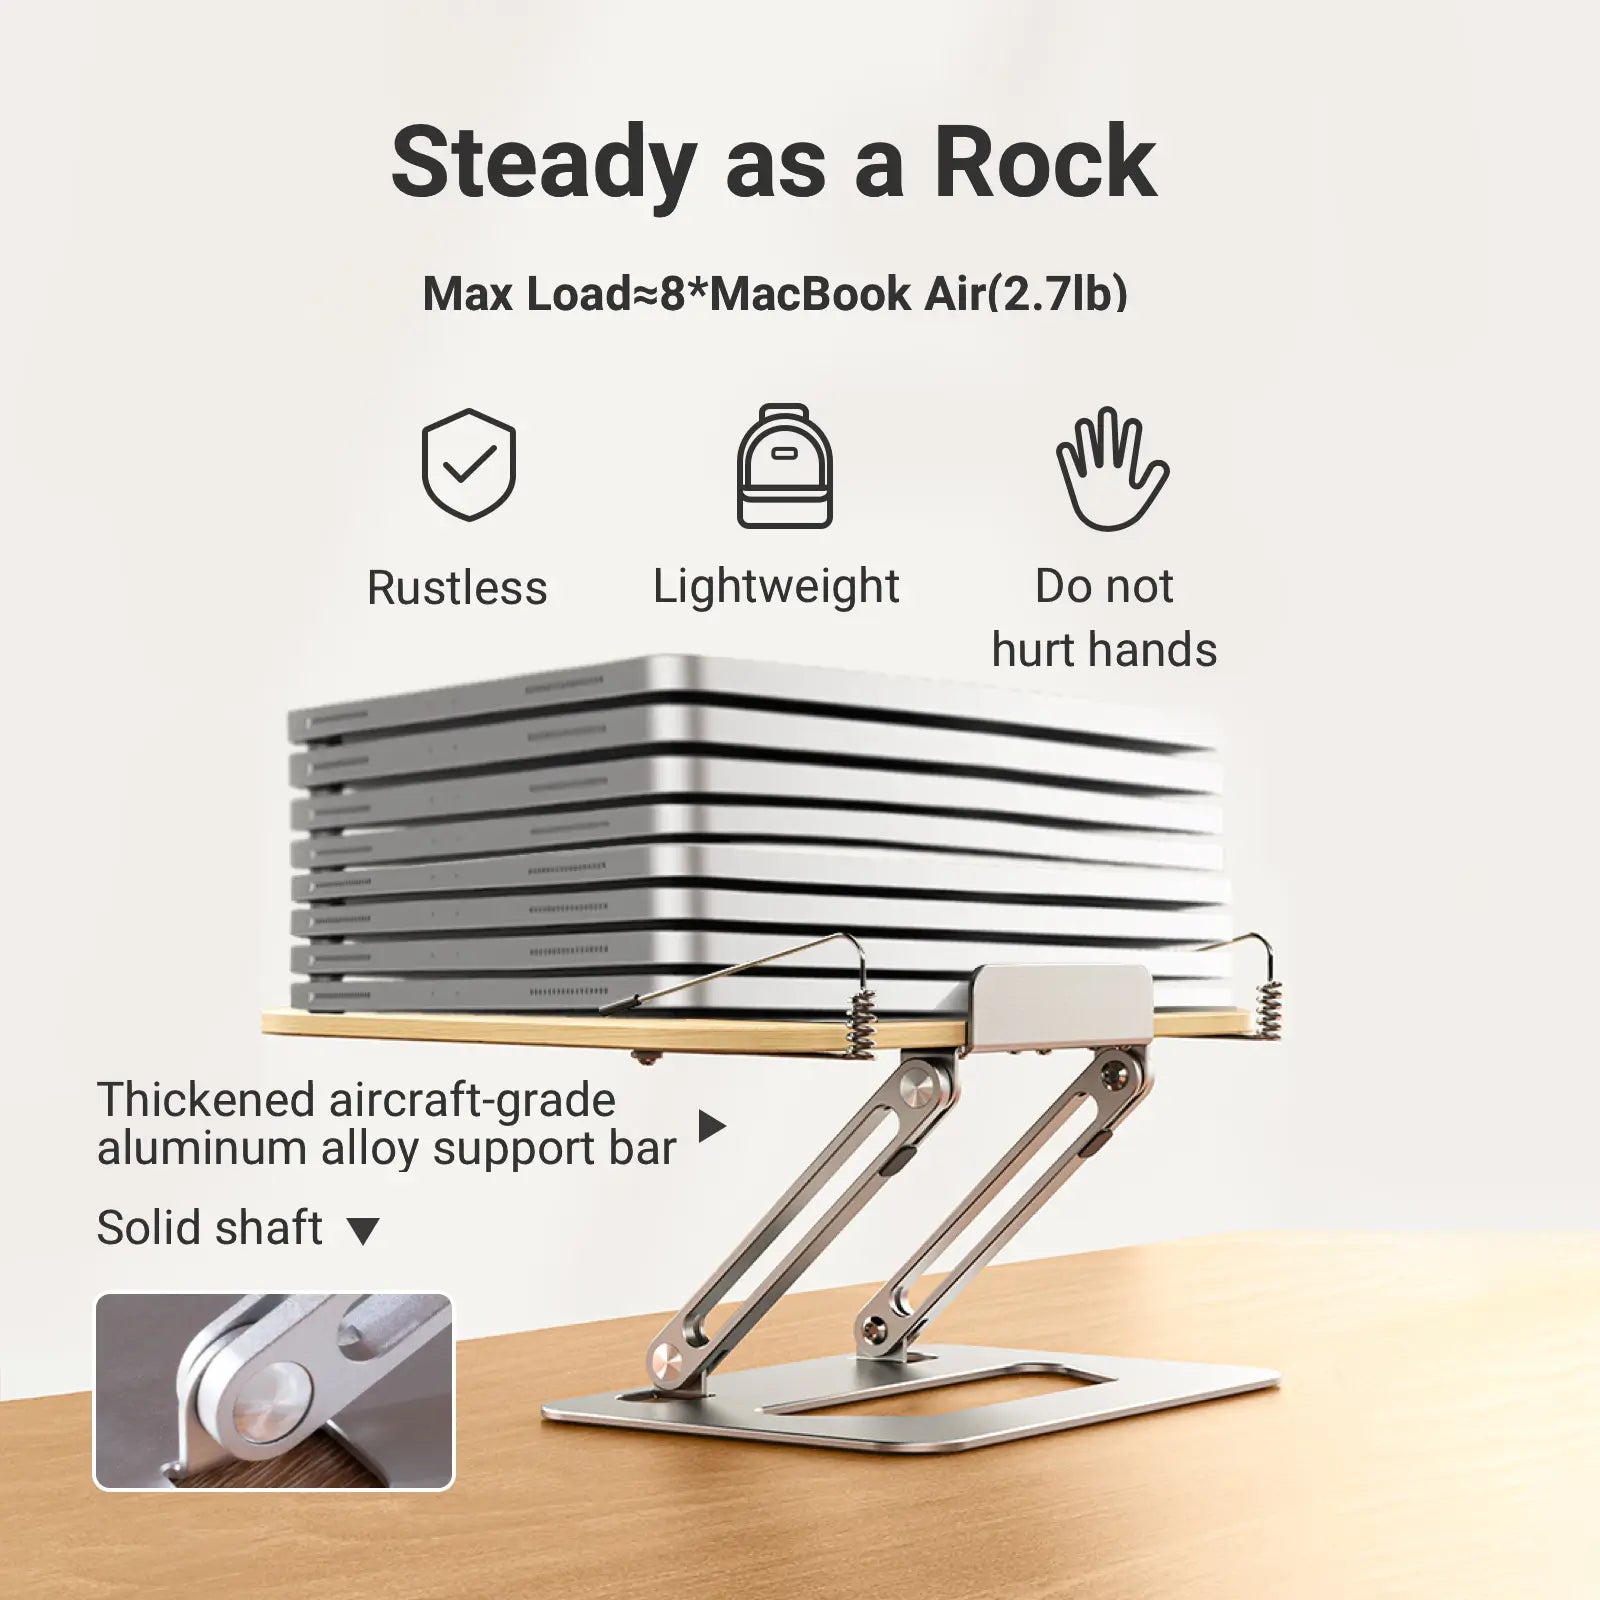 Portable Laptop Stand Tablet and Book Holder for Desk Cool Gadget